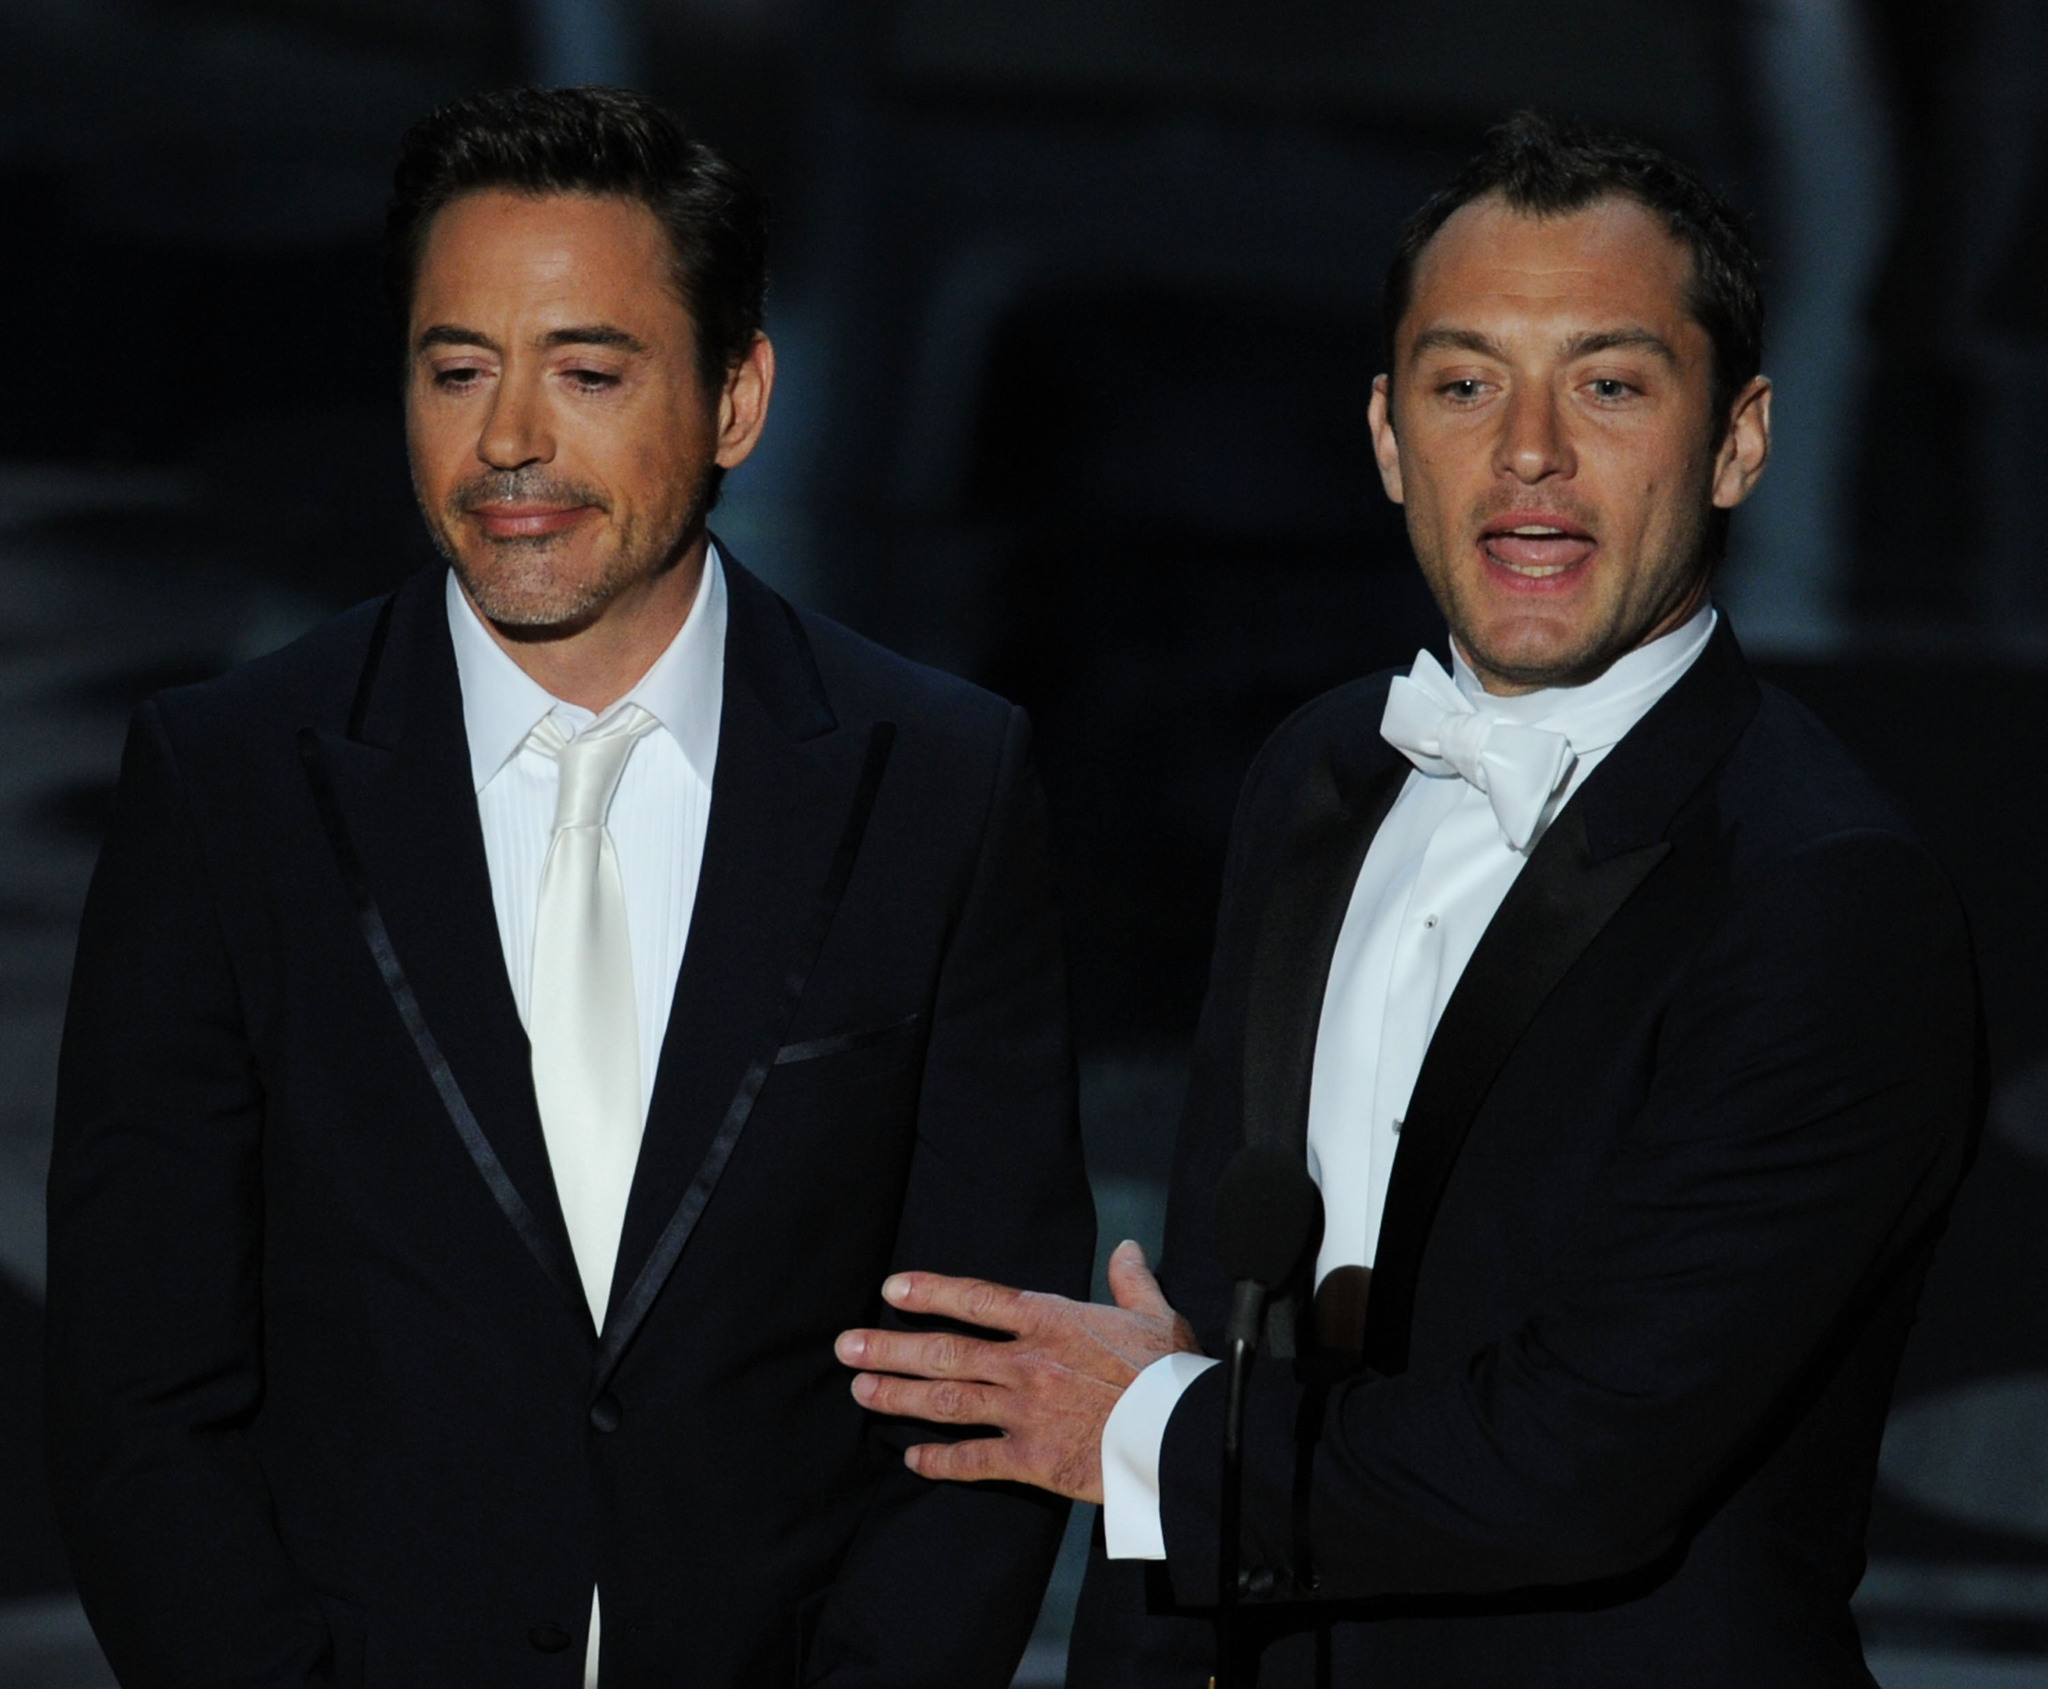 Jude Law and Robert Downey Jr.